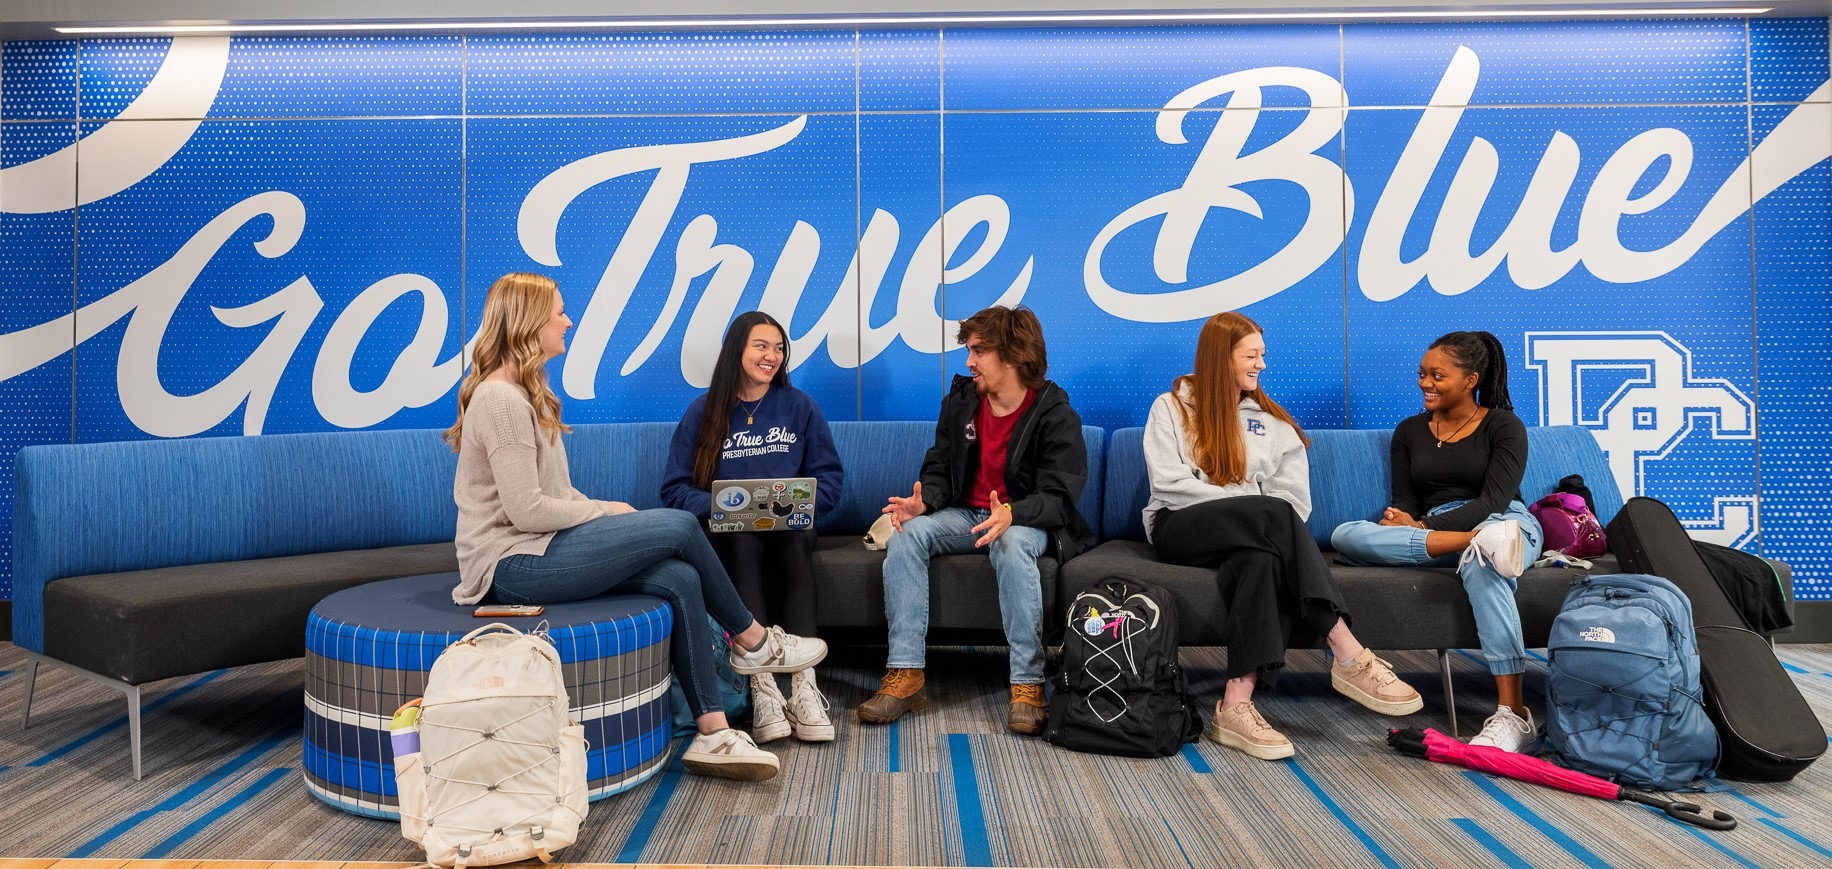 Presbyterian College Students in Springs Student Center in front of Go True Blue wall